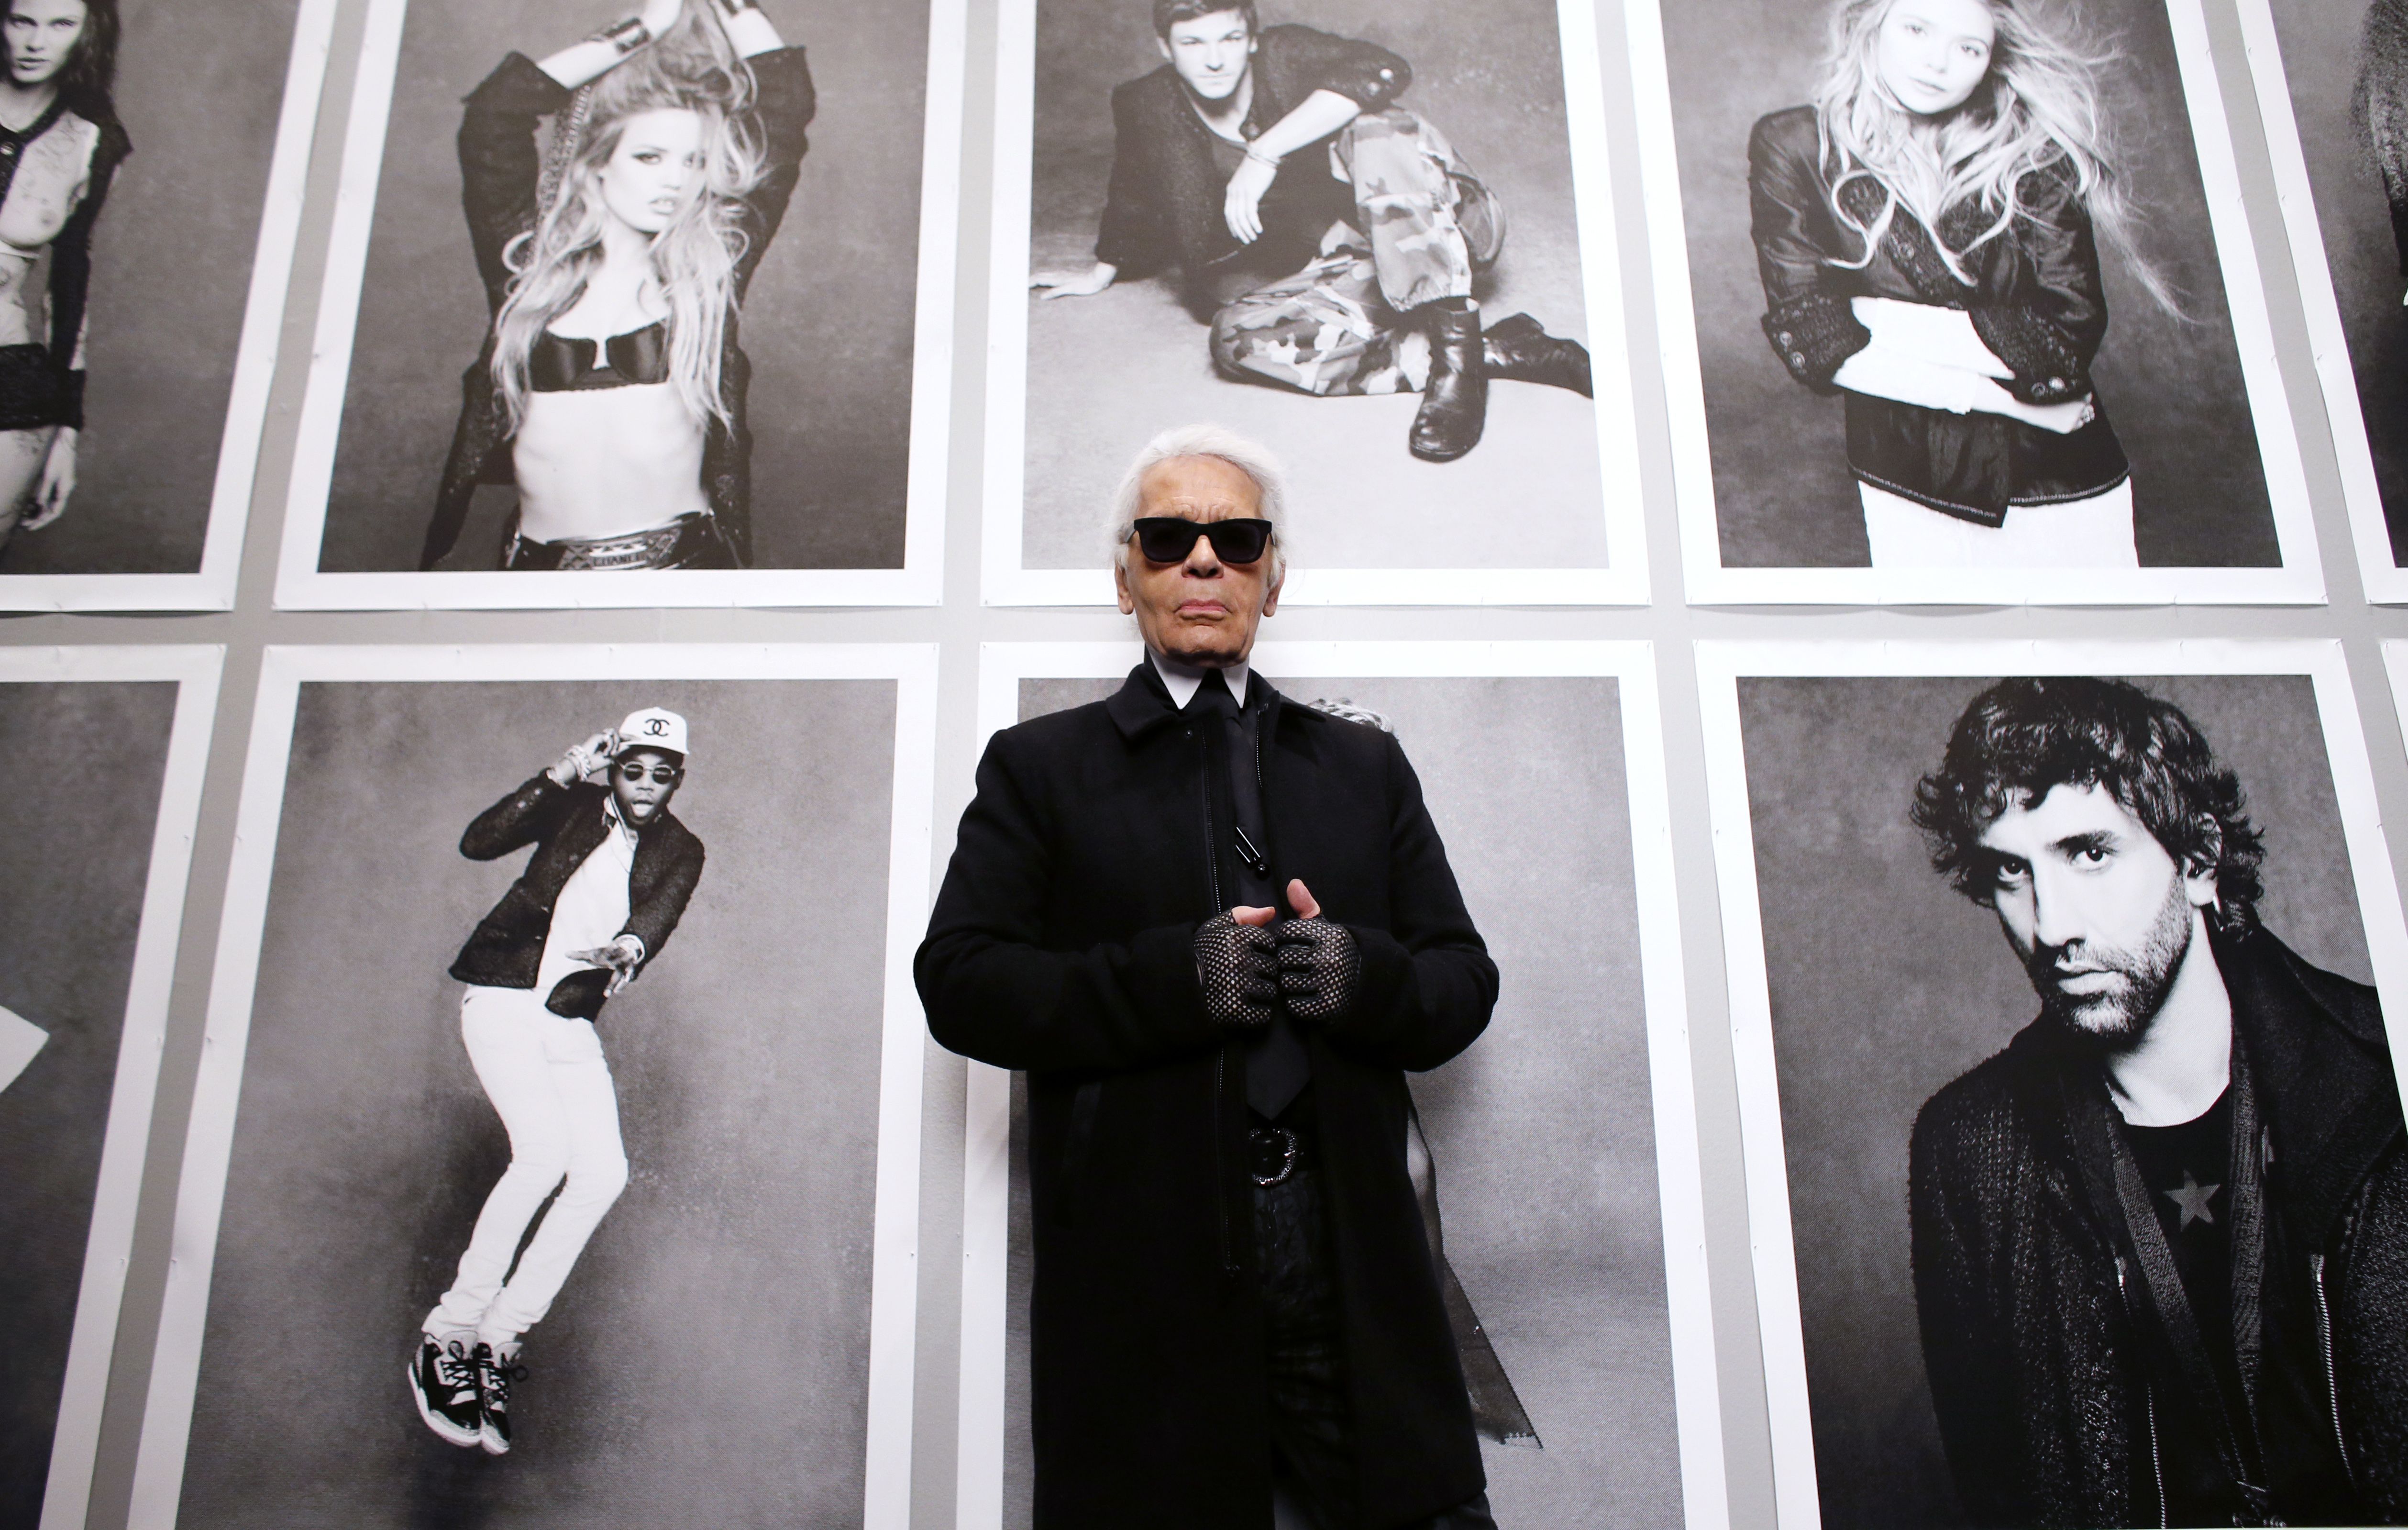 Black & White design objects inspired by Karl Lagerfeld